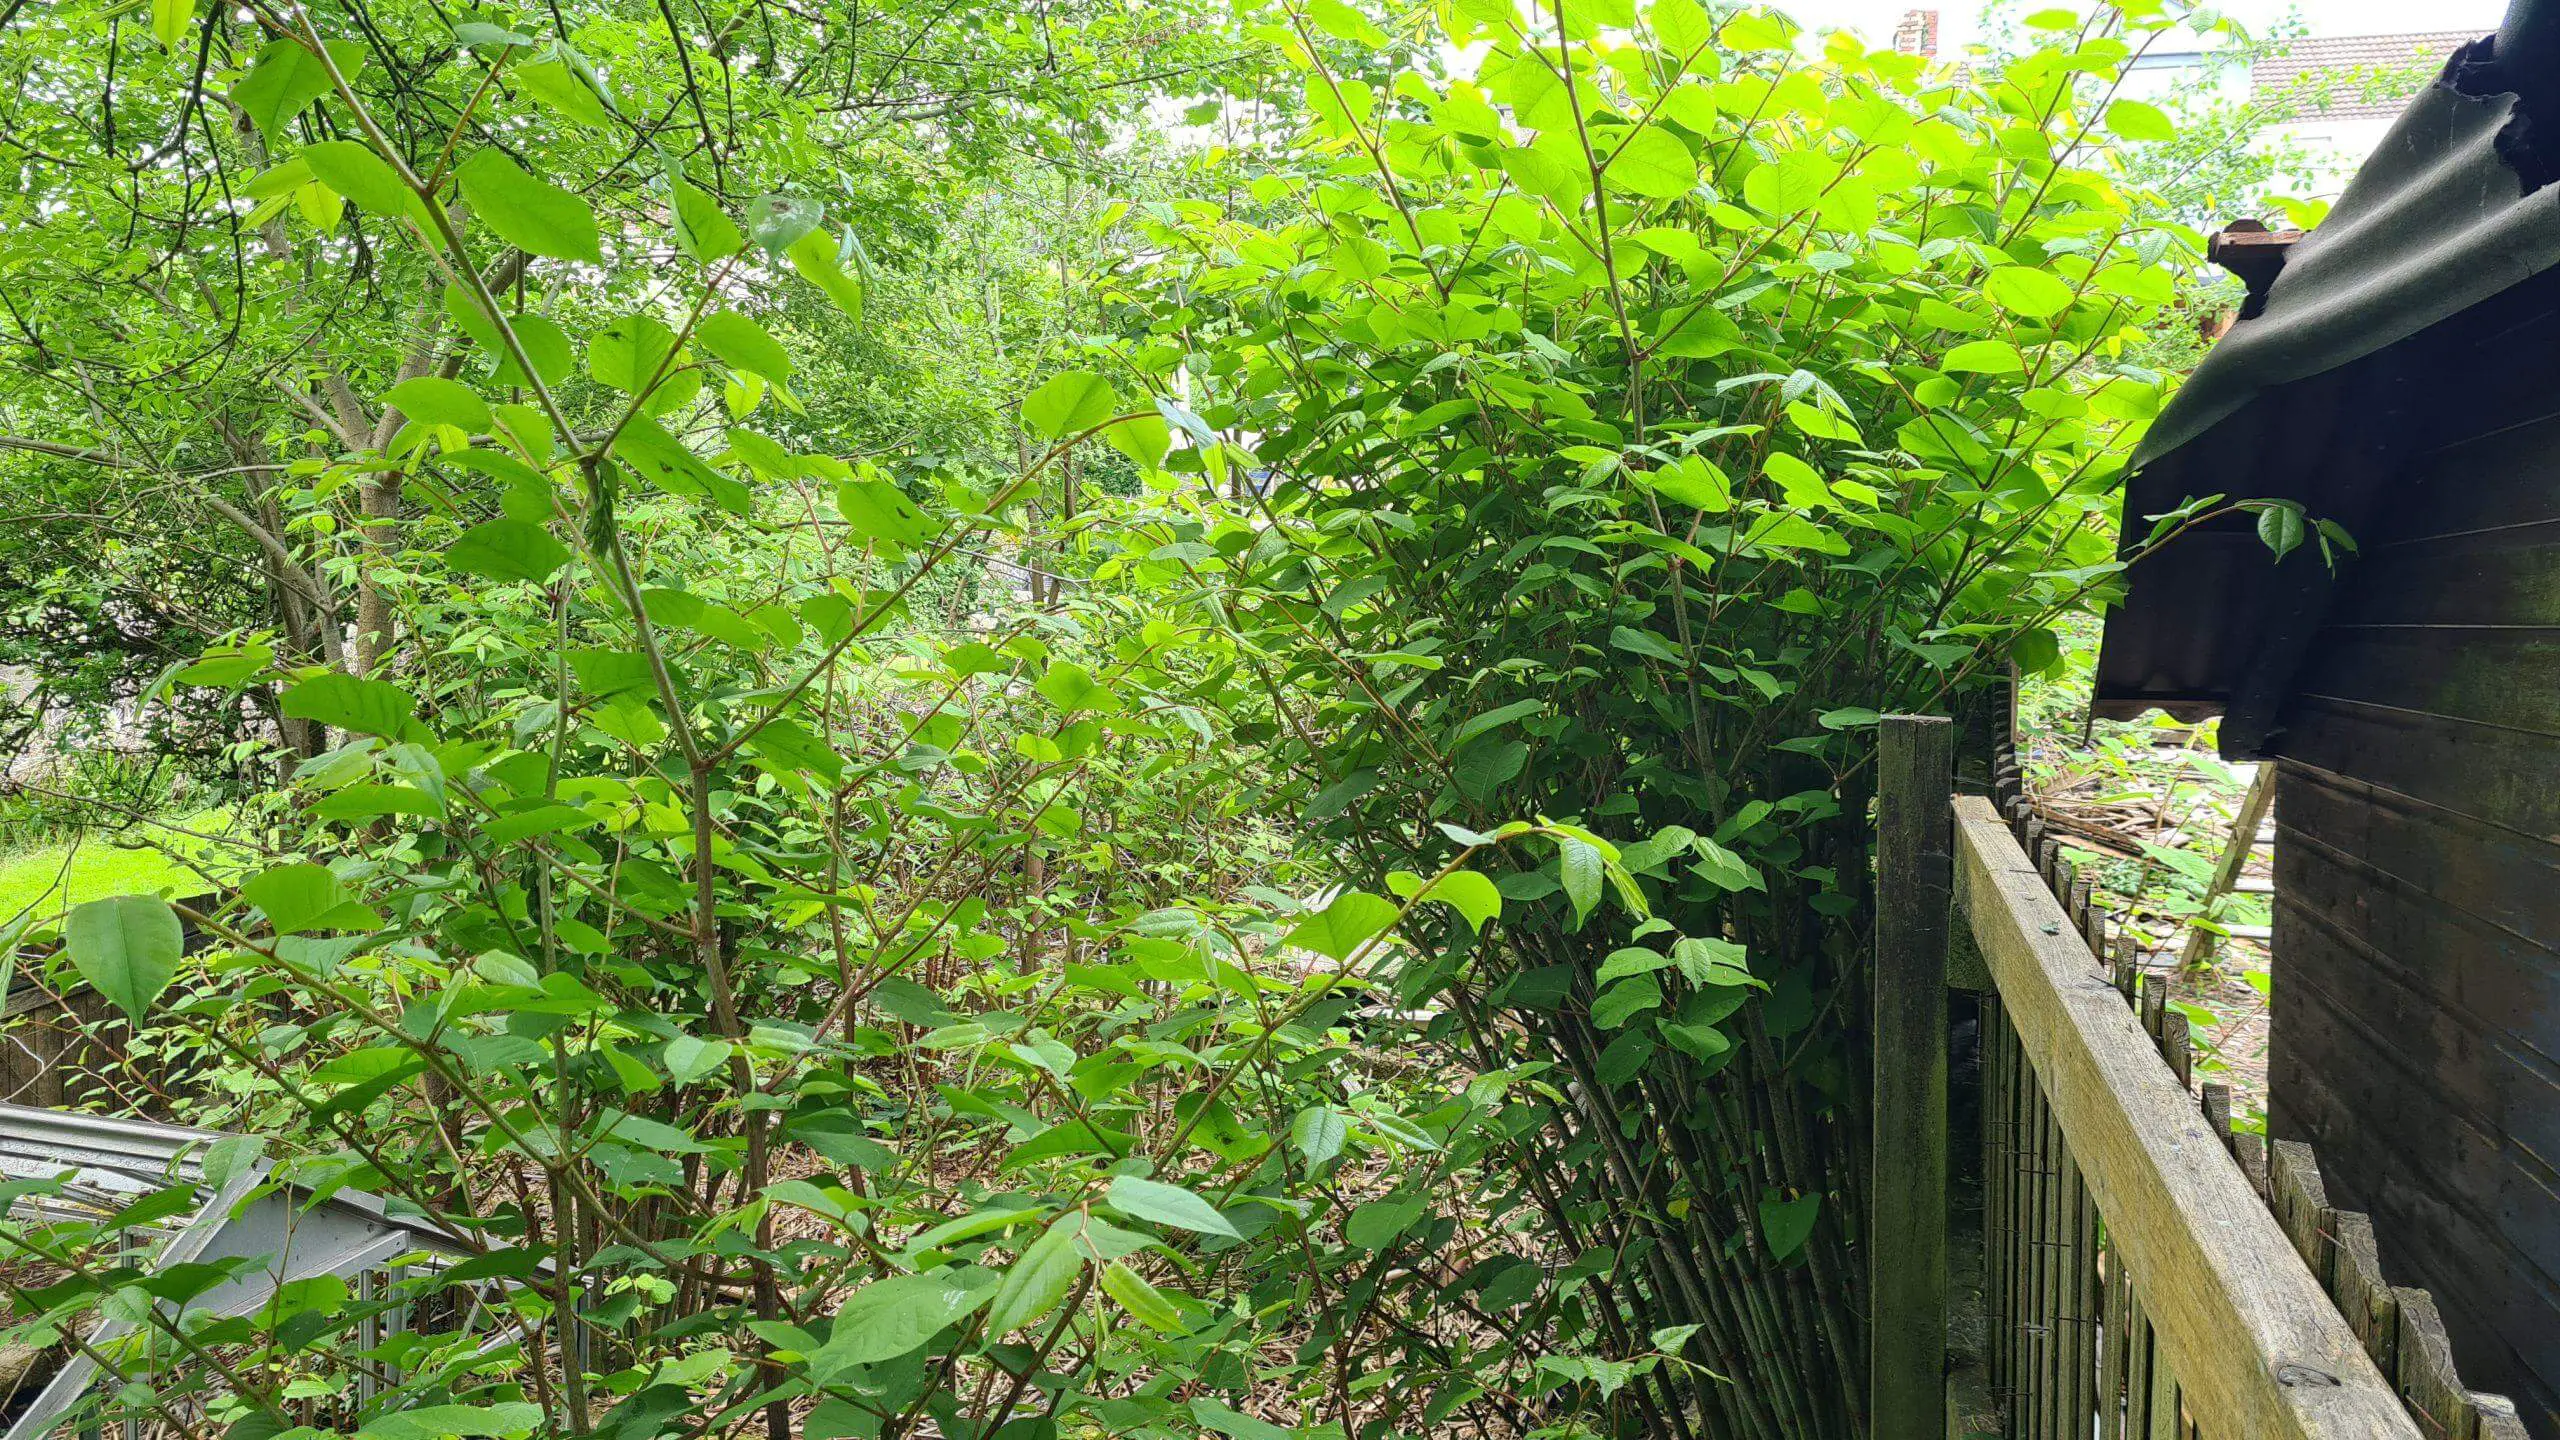 Japanese knotweed encroaching onto another property and about cause a whole lot of trouble legally and structurally